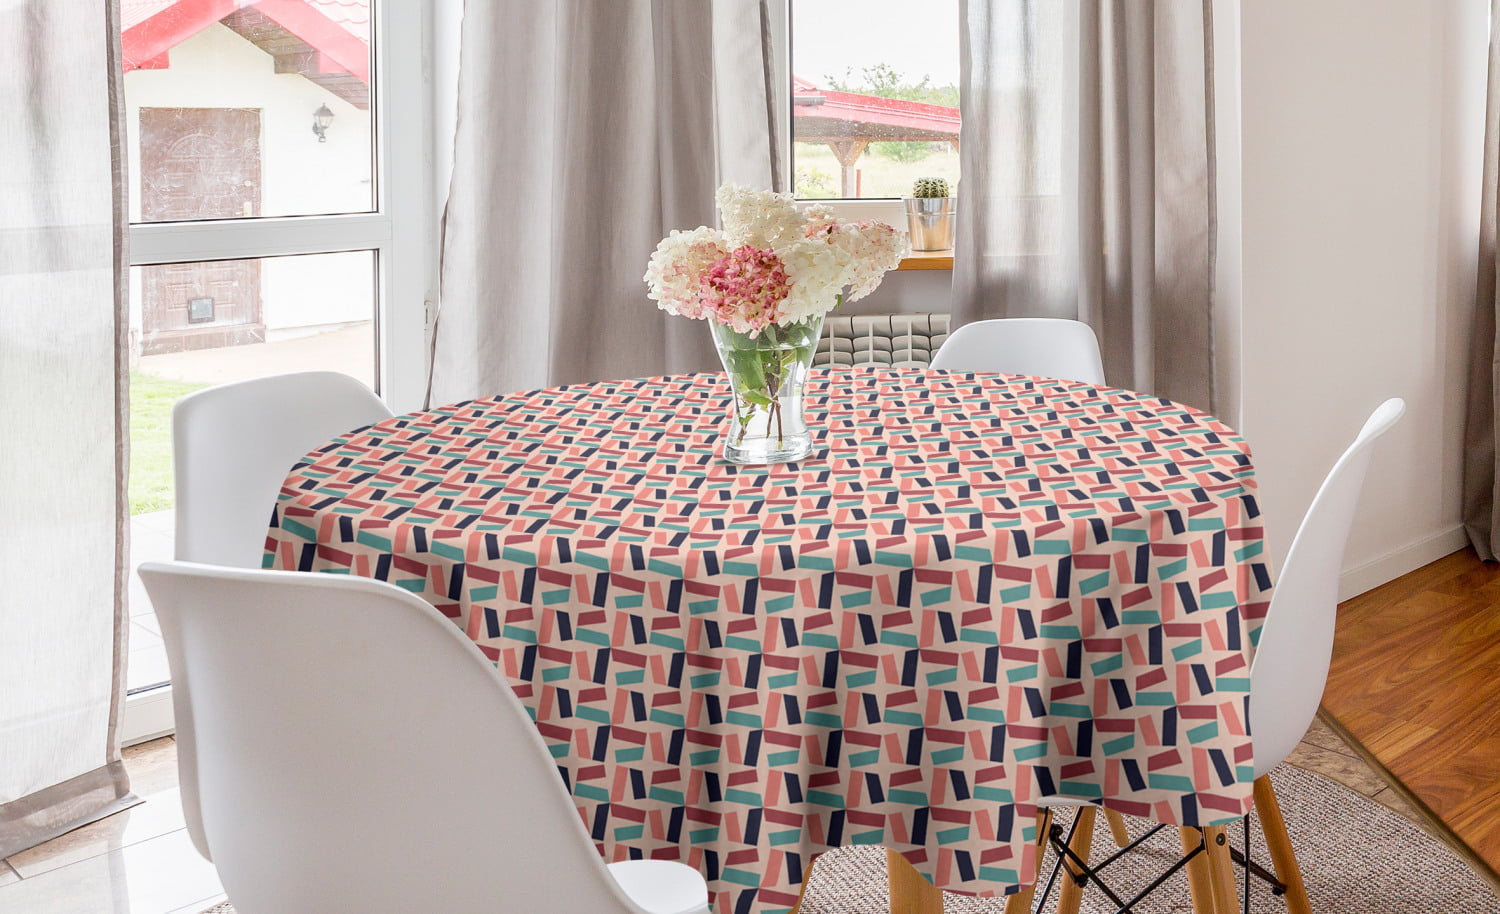 Geometric Print Waterproof Tablecloth Rectangle Table Cloth Cover Dining Kitchen 